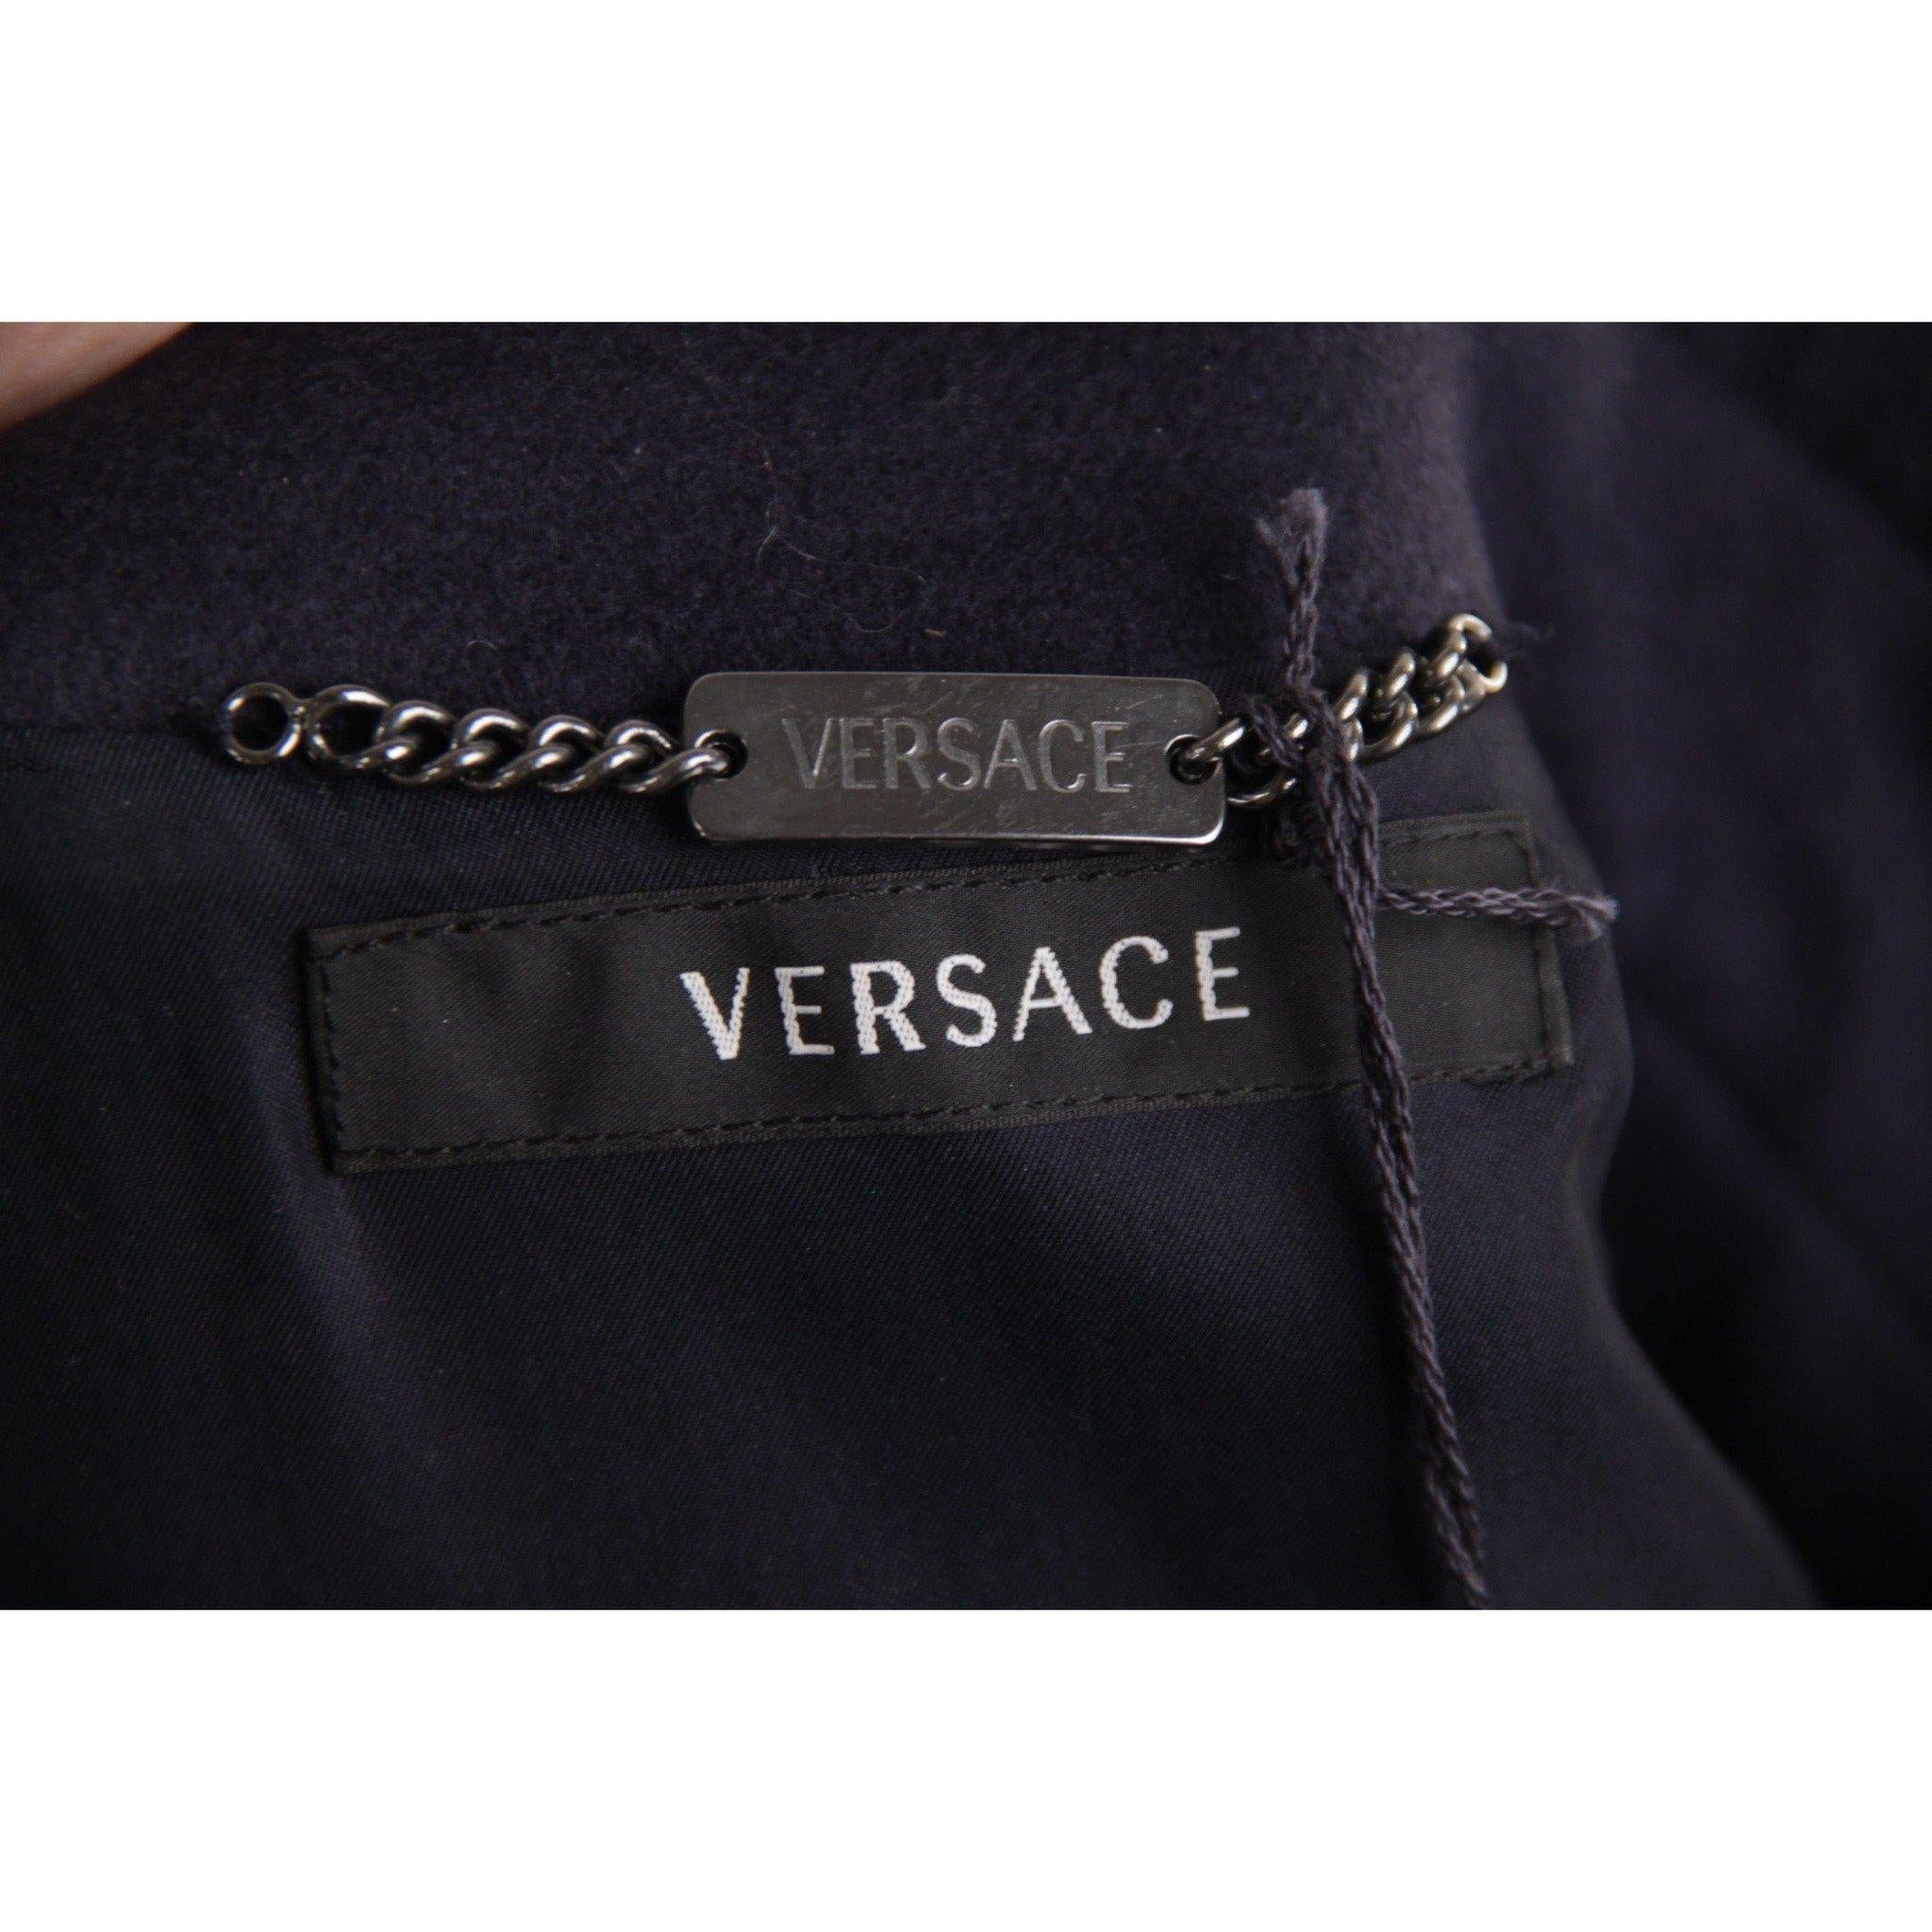 Versace Blue Wool Coat 2008 Fall Winter Collection Size 40 2